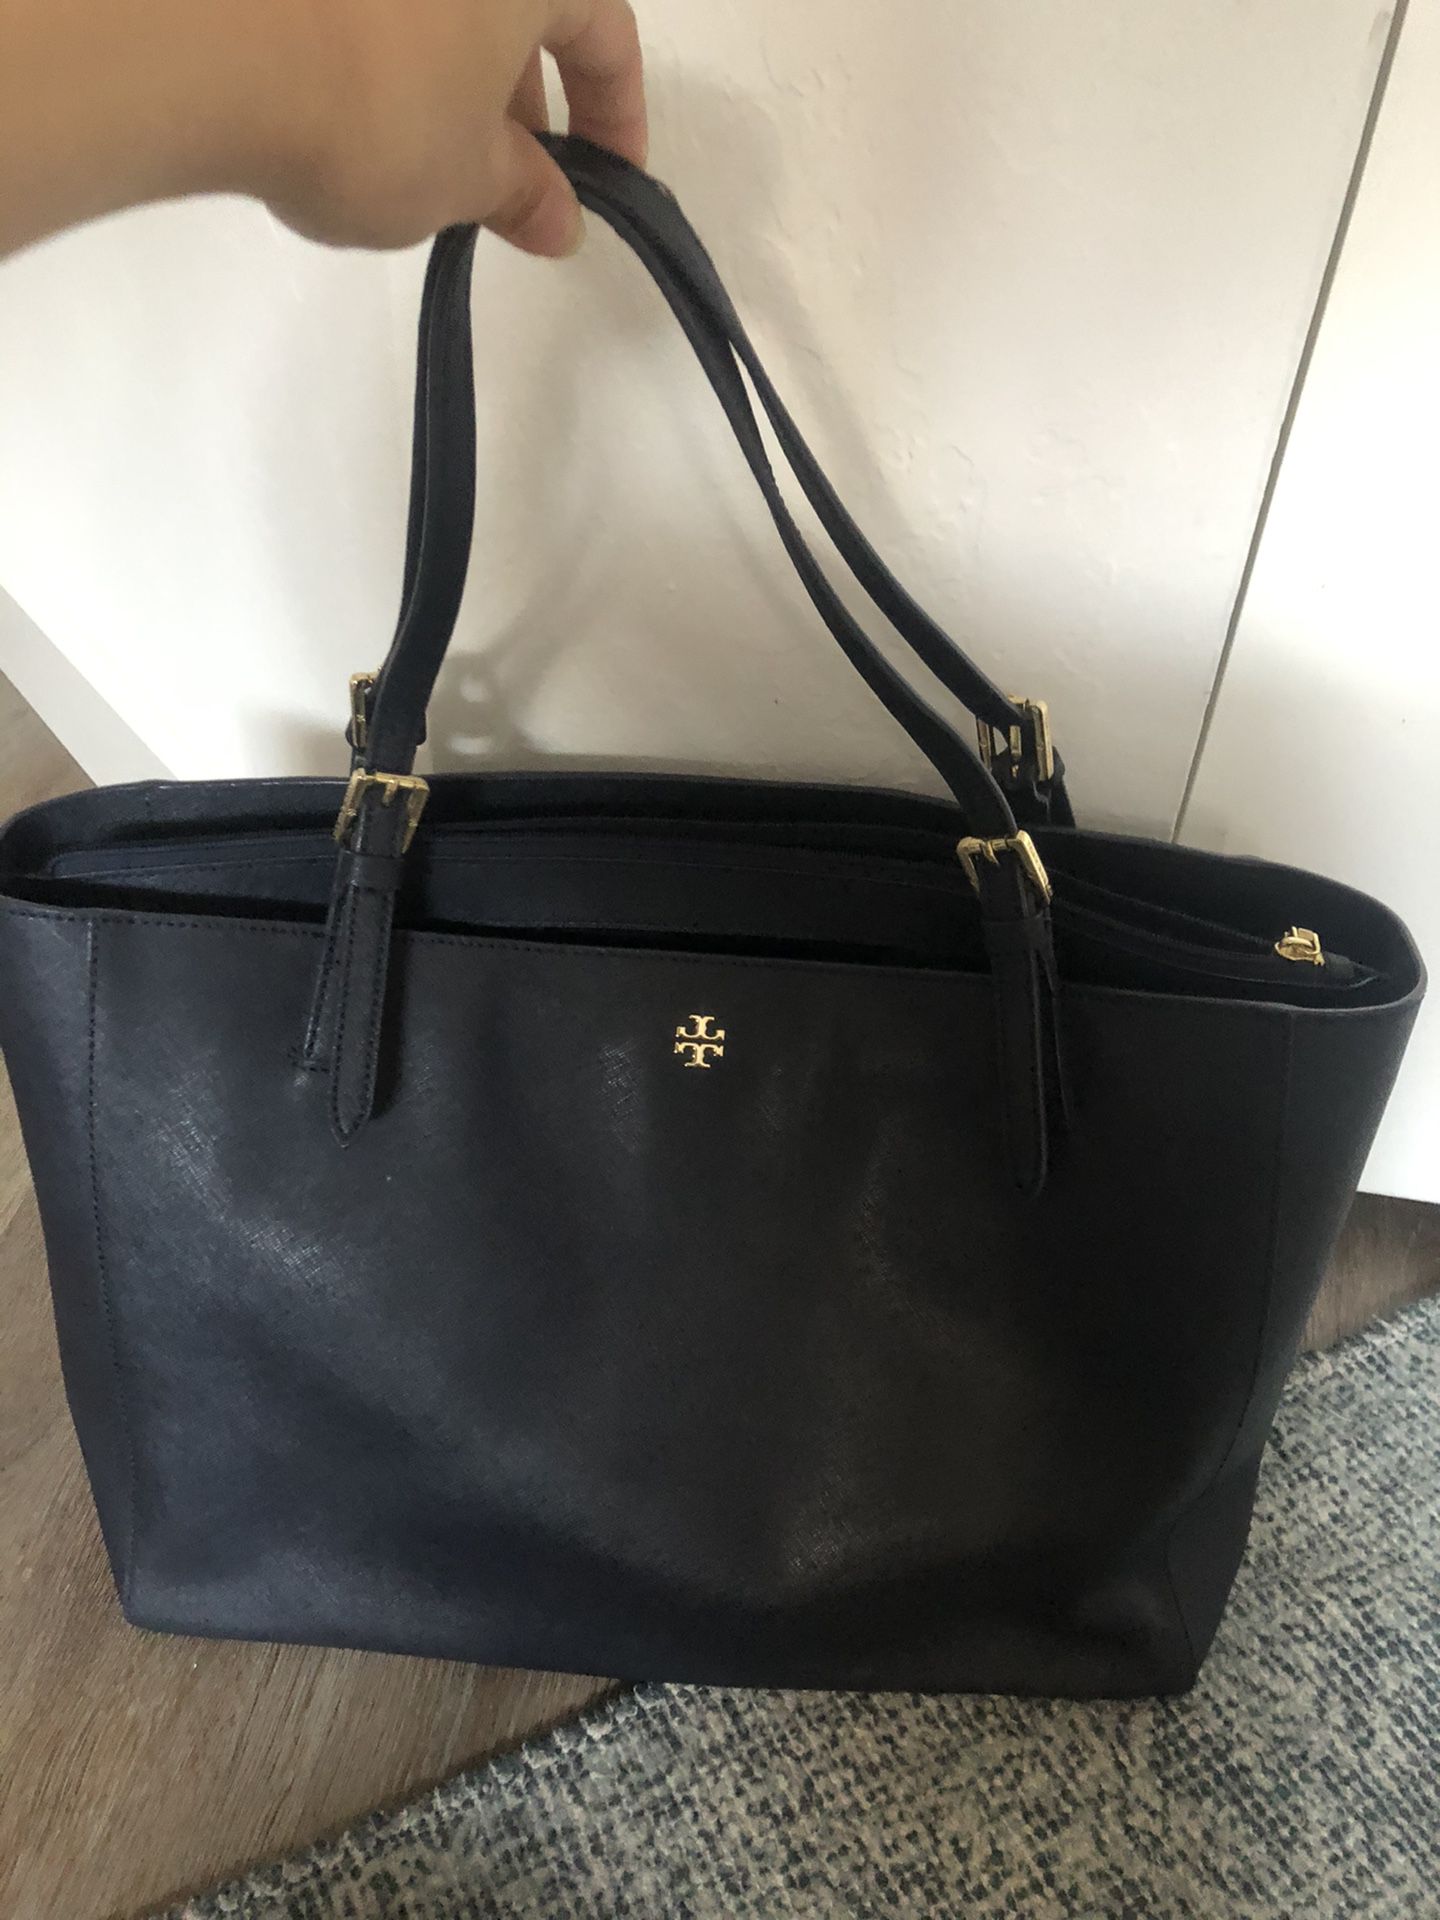 TORY BURCH EMERSON LARGE ZIP TOTE- NAVY BLUE AUTHETIC for Sale in Los  Angeles, CA - OfferUp